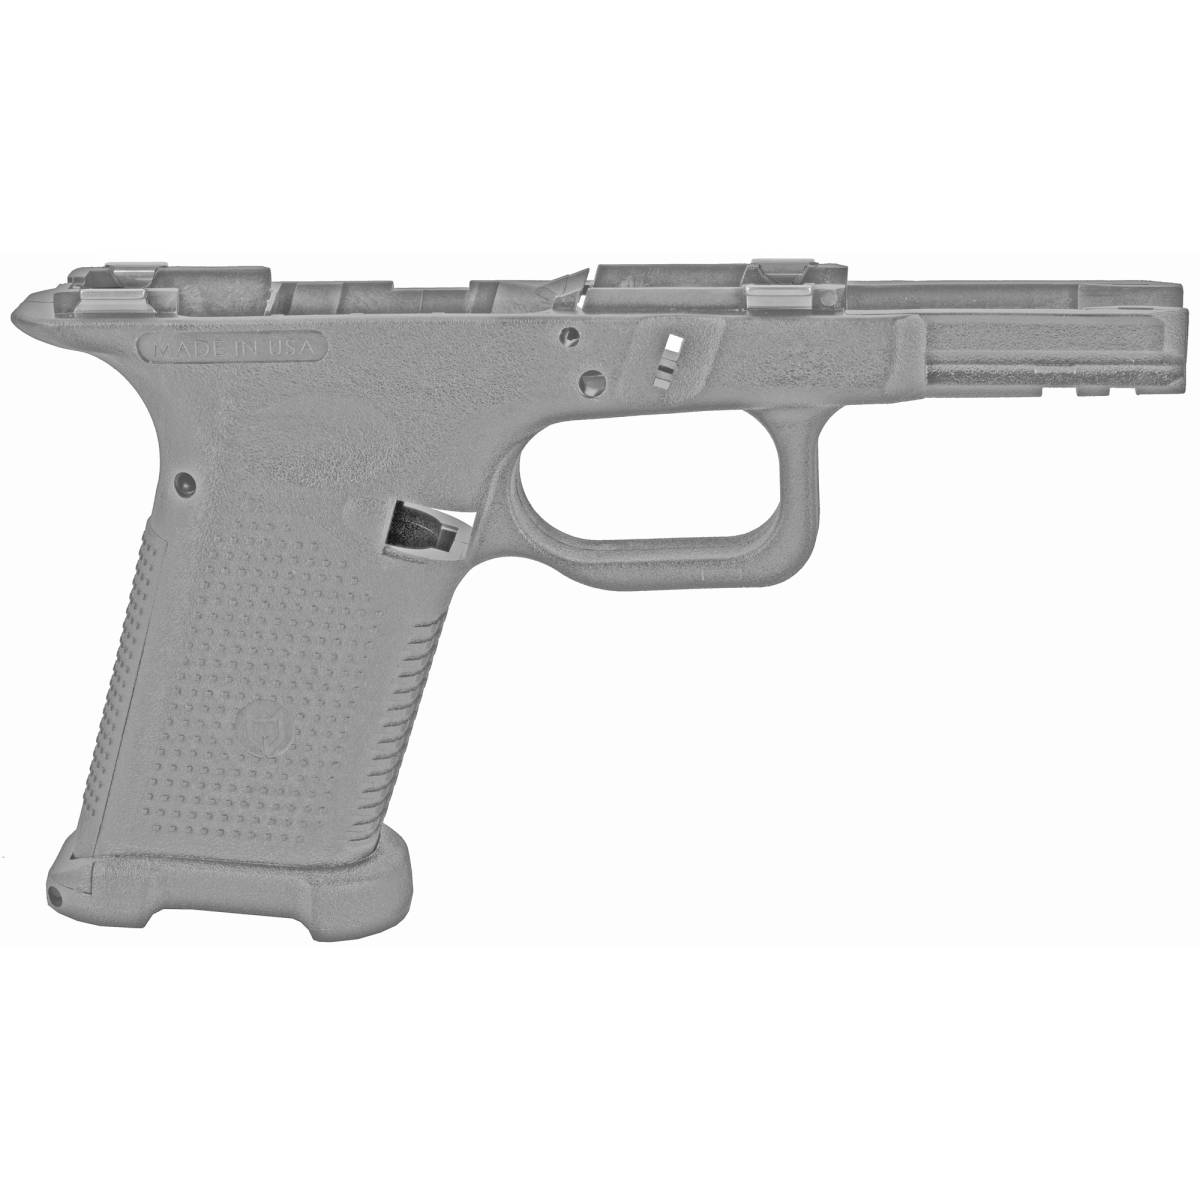 LWD BARE TW CMP FRAME AND GRIP GRY-img-1